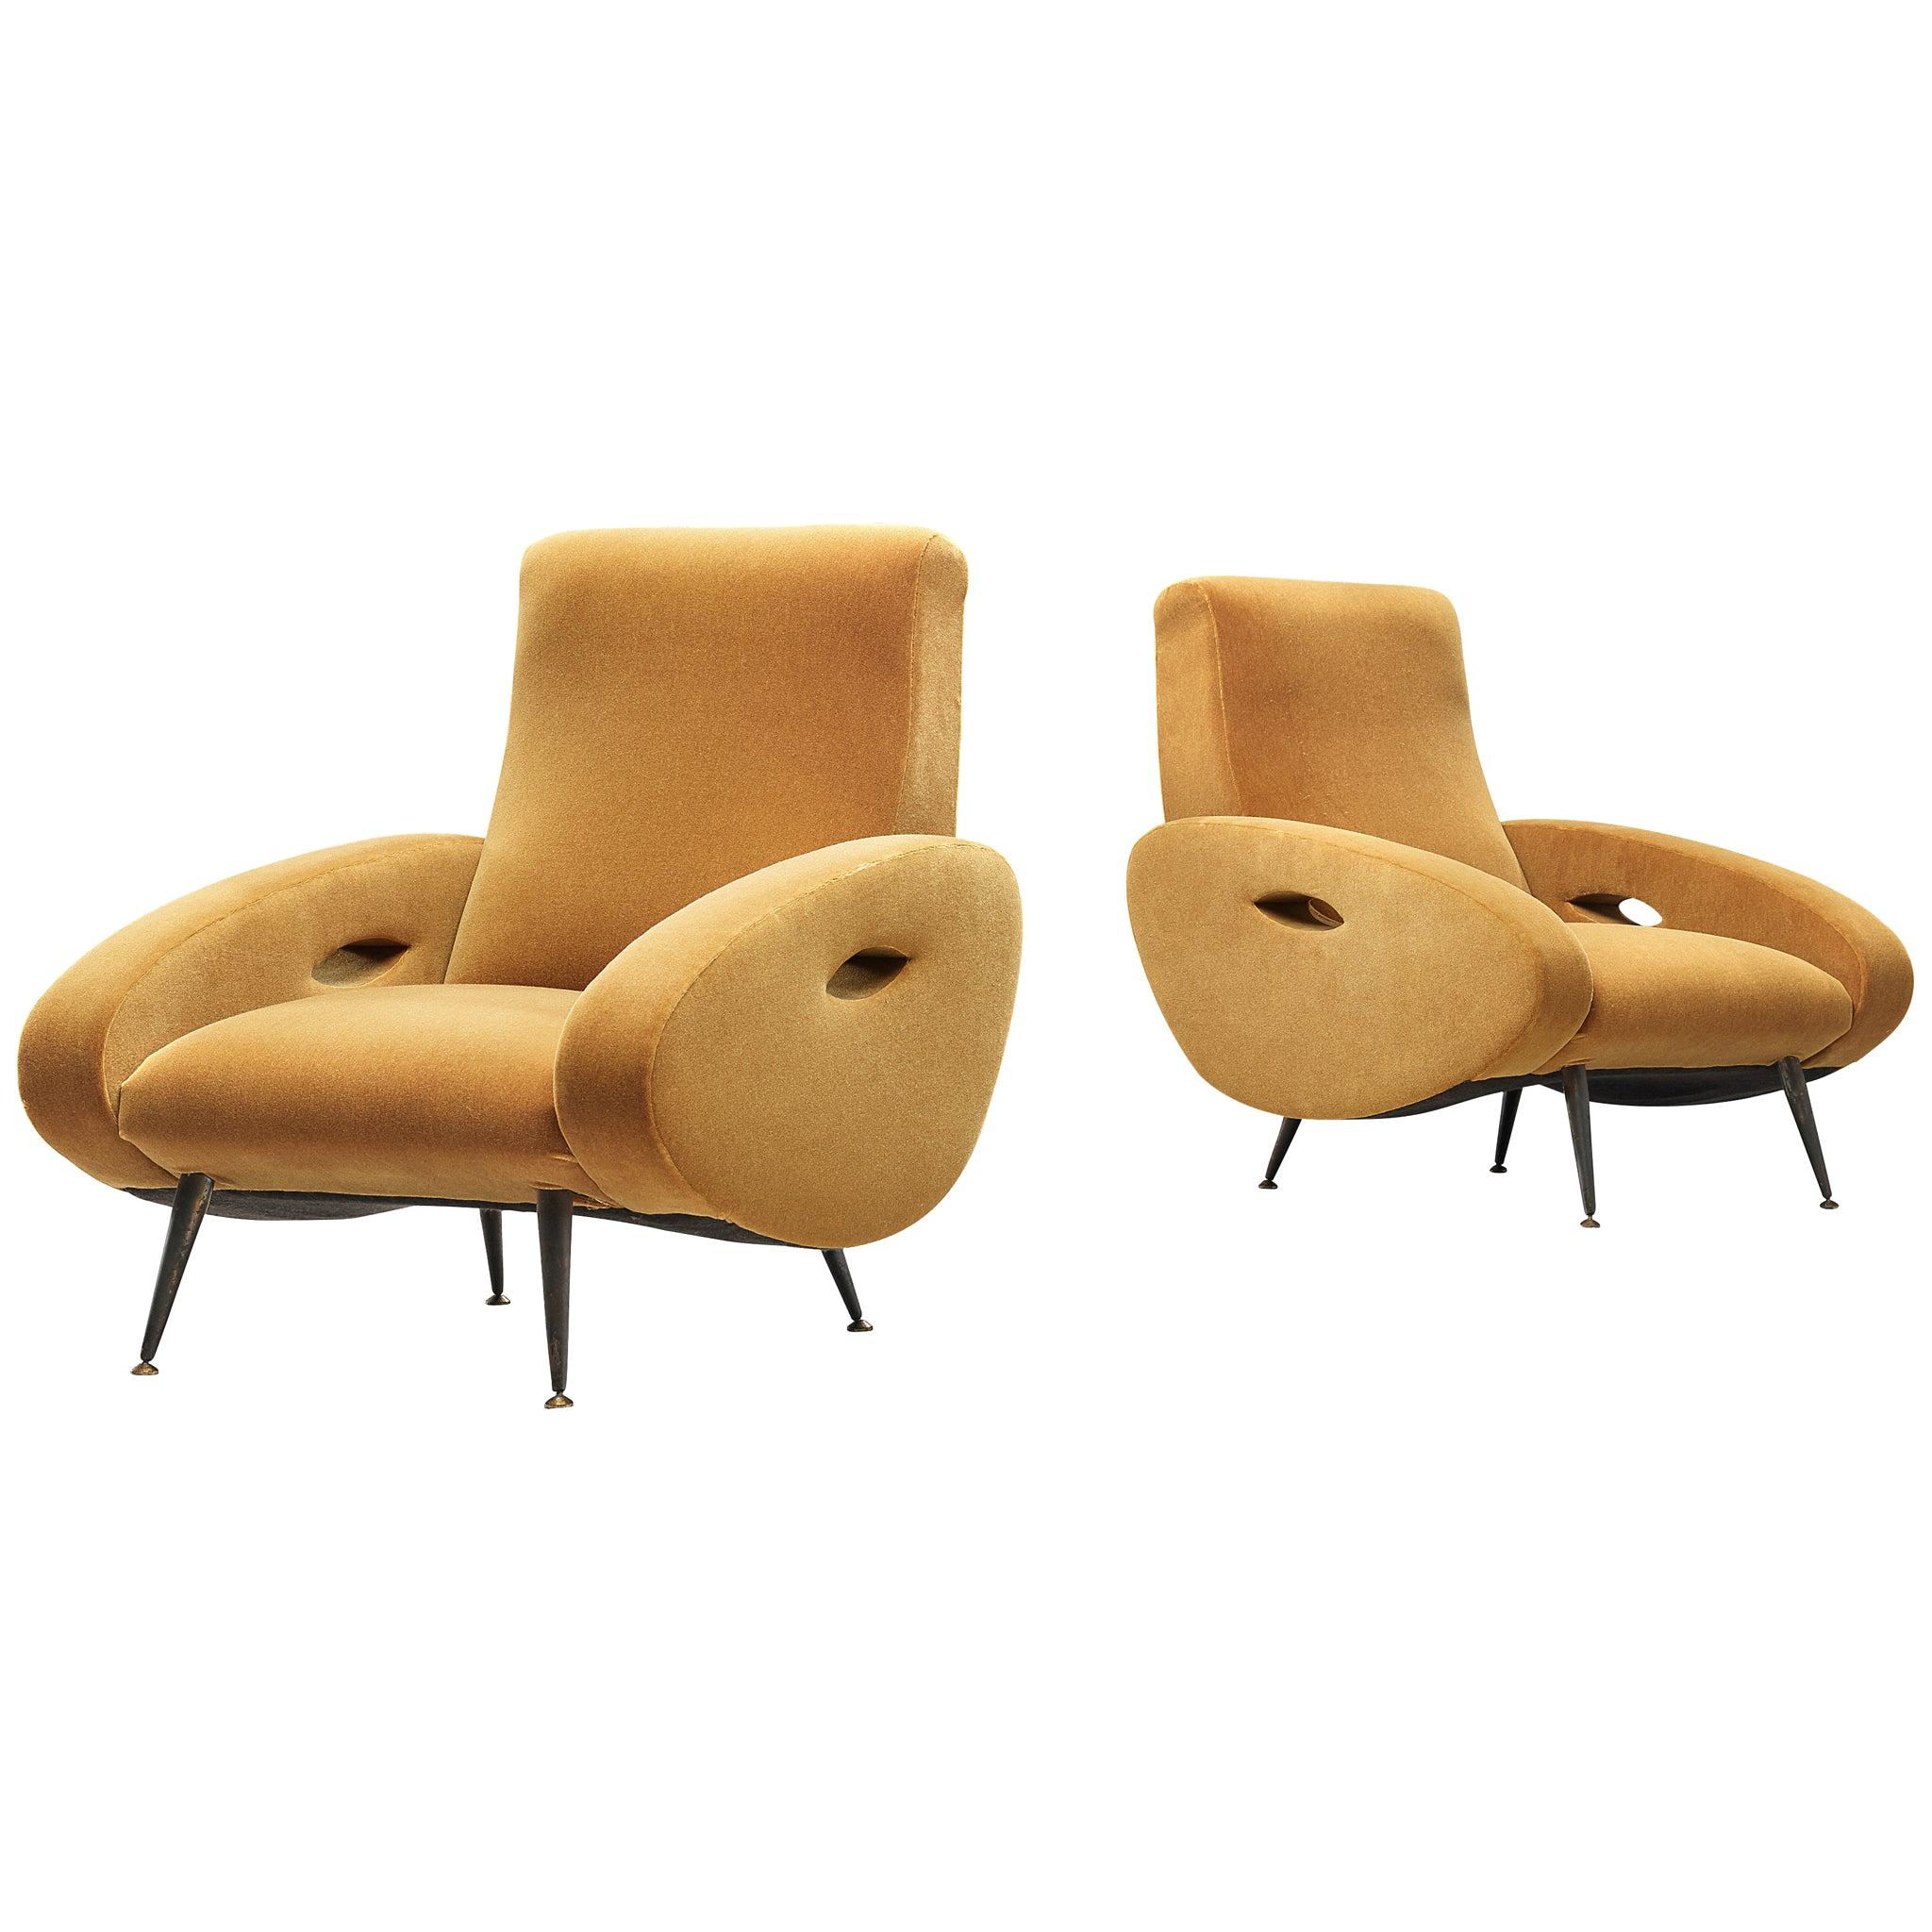 Francois Letourneur Pair of Reupholstered Lounge Chairs